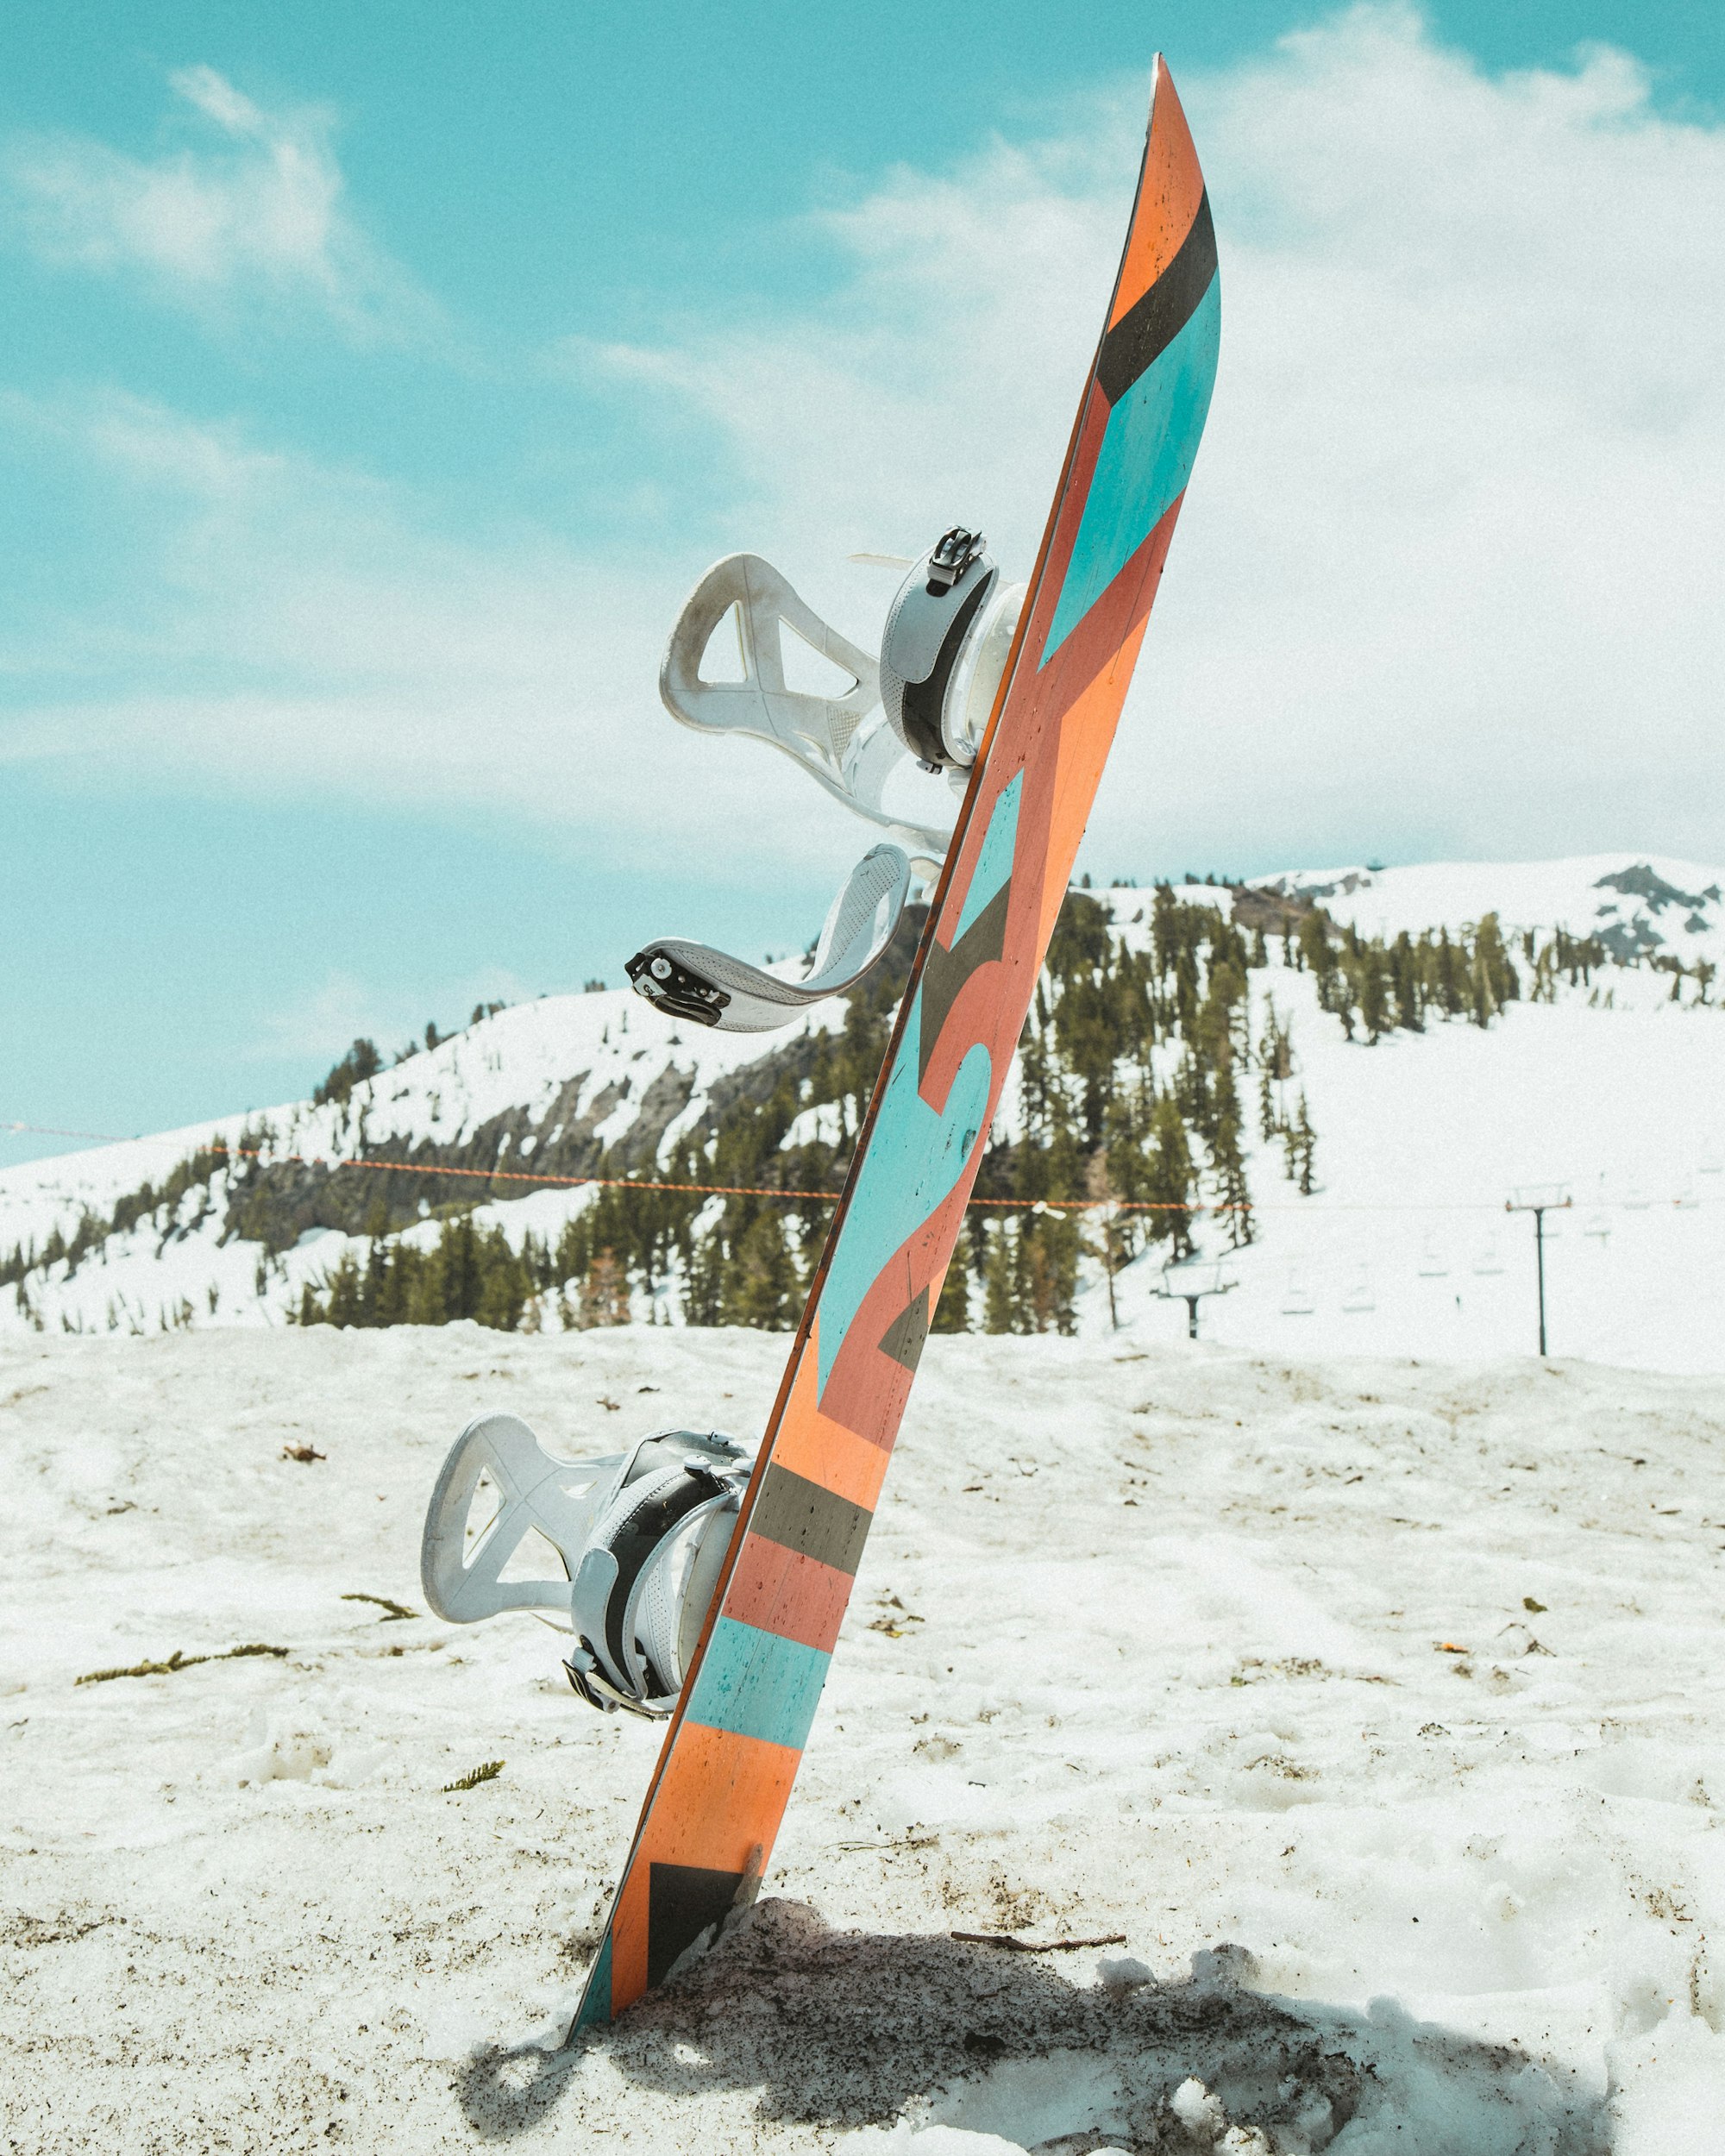 How Much Does a Snowboard Cost?